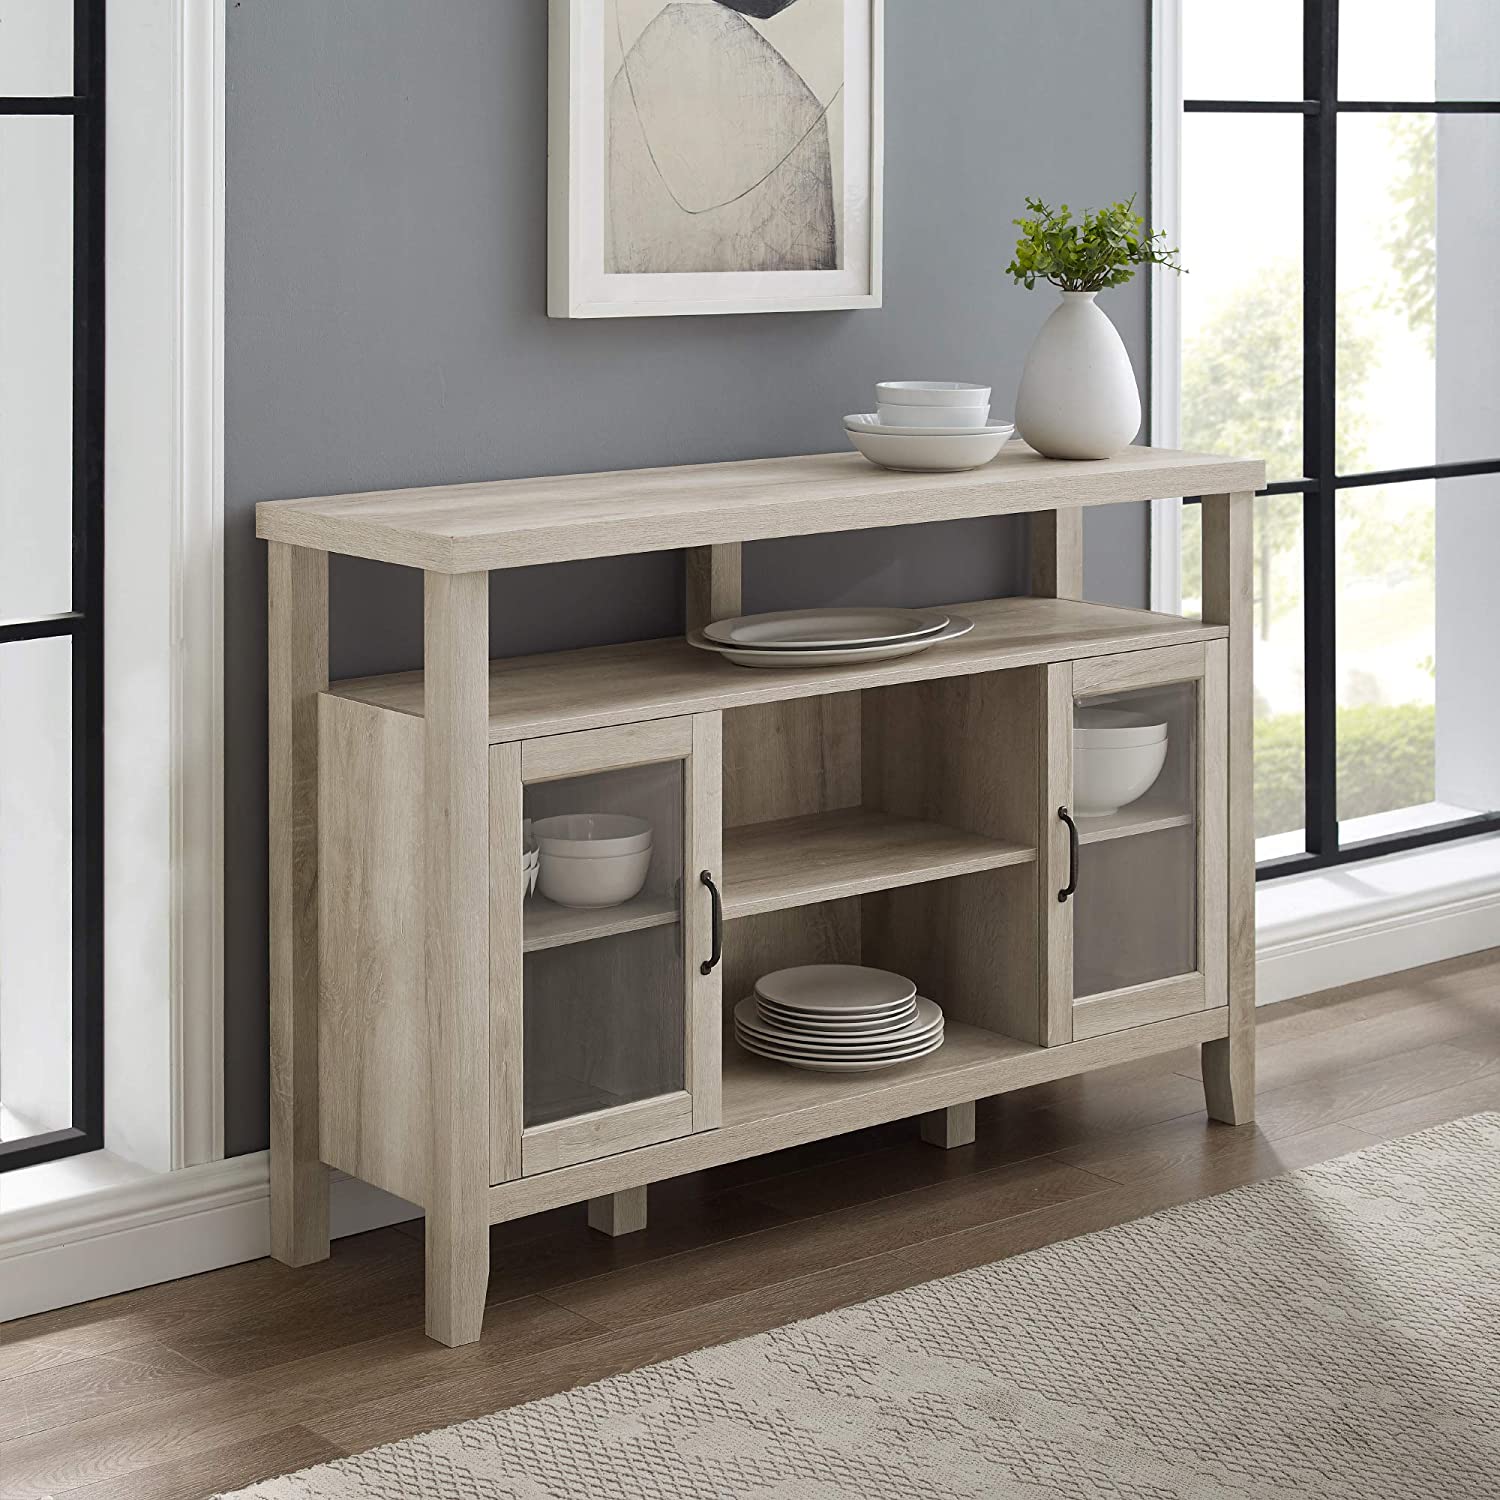 Walker Edison Tall Wood TV Stand w/ Open Storage (White Oak, up to 58" TVs) $126.83 + Free Shipping